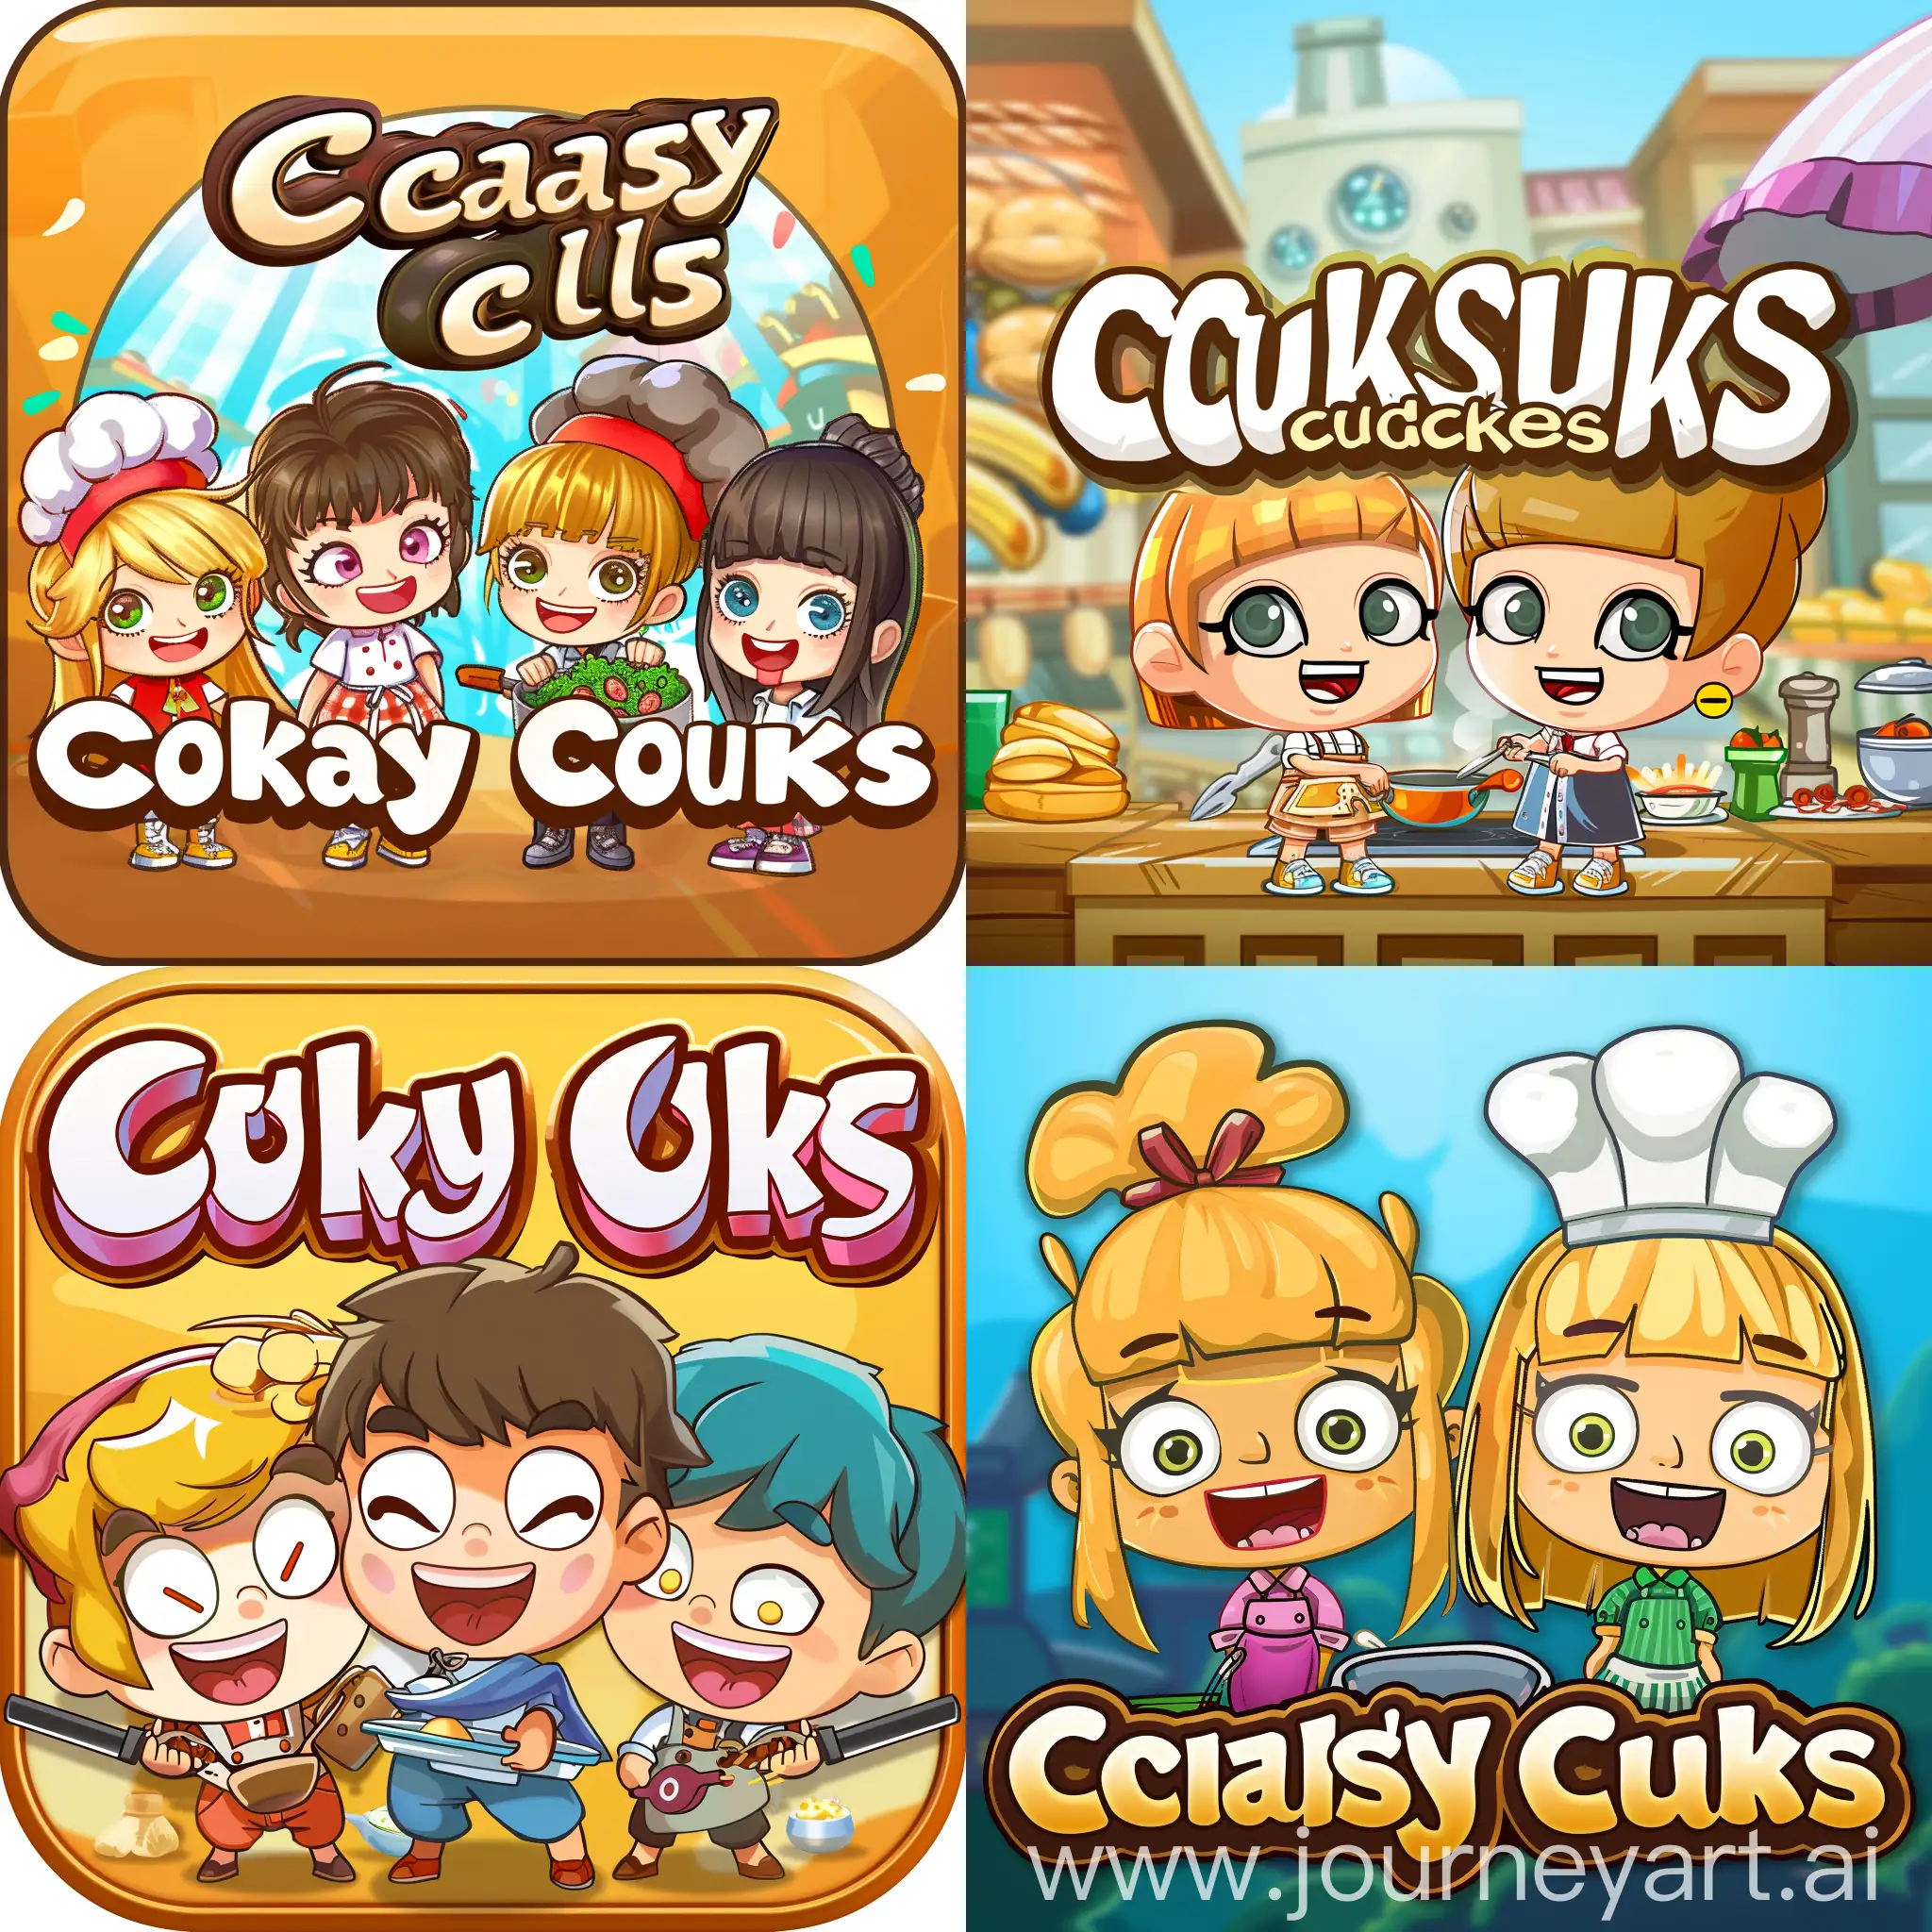 cooking multiplayer game title screen, chibi style, with title "Crazy Cooks"